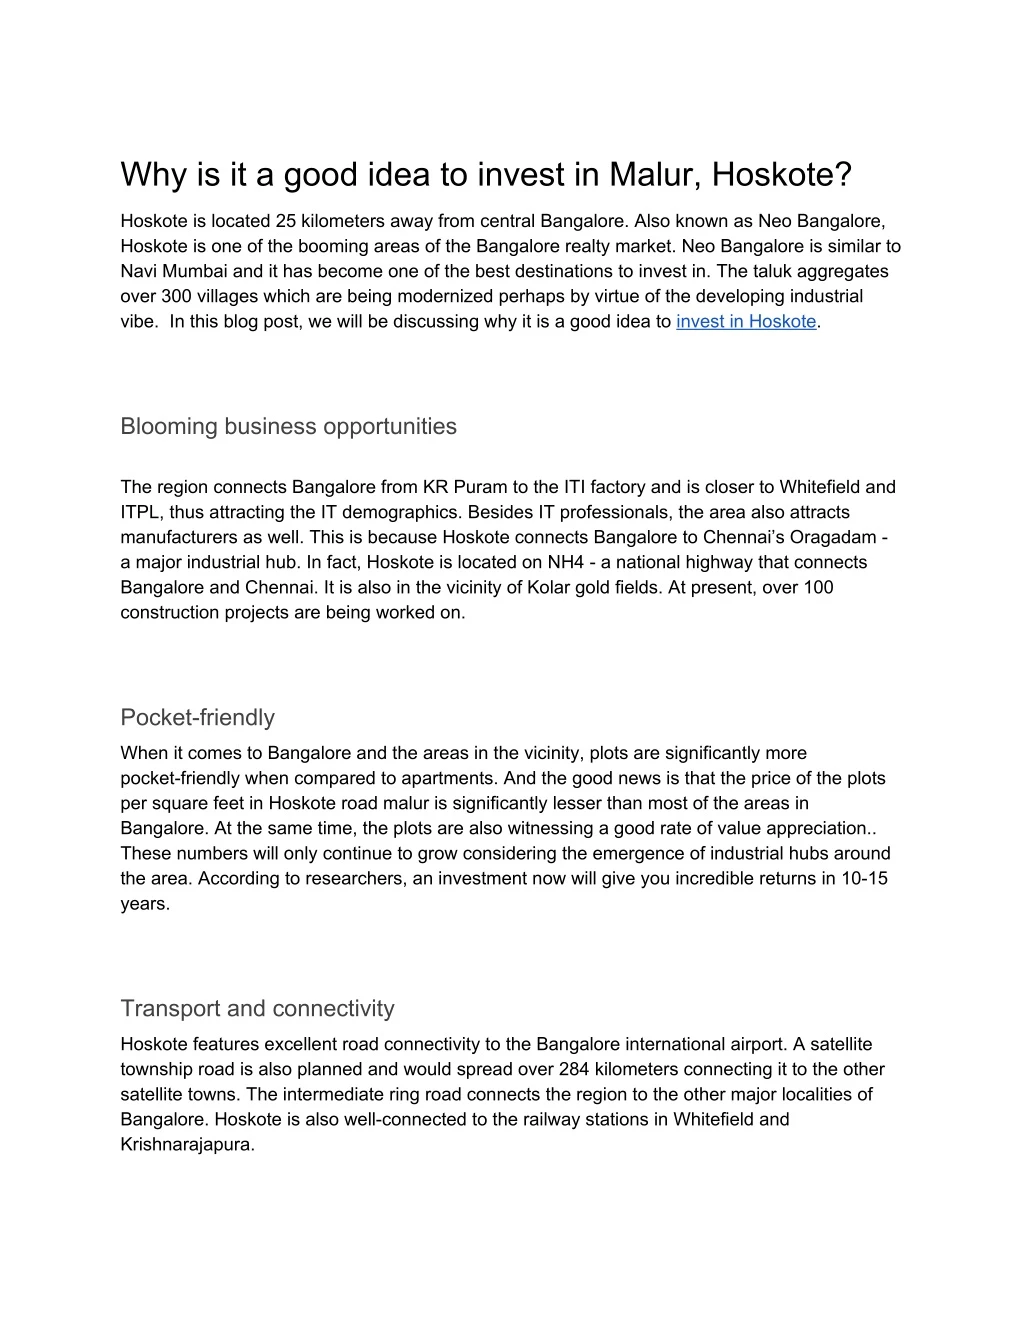 why is it a good idea to invest in malur hoskote